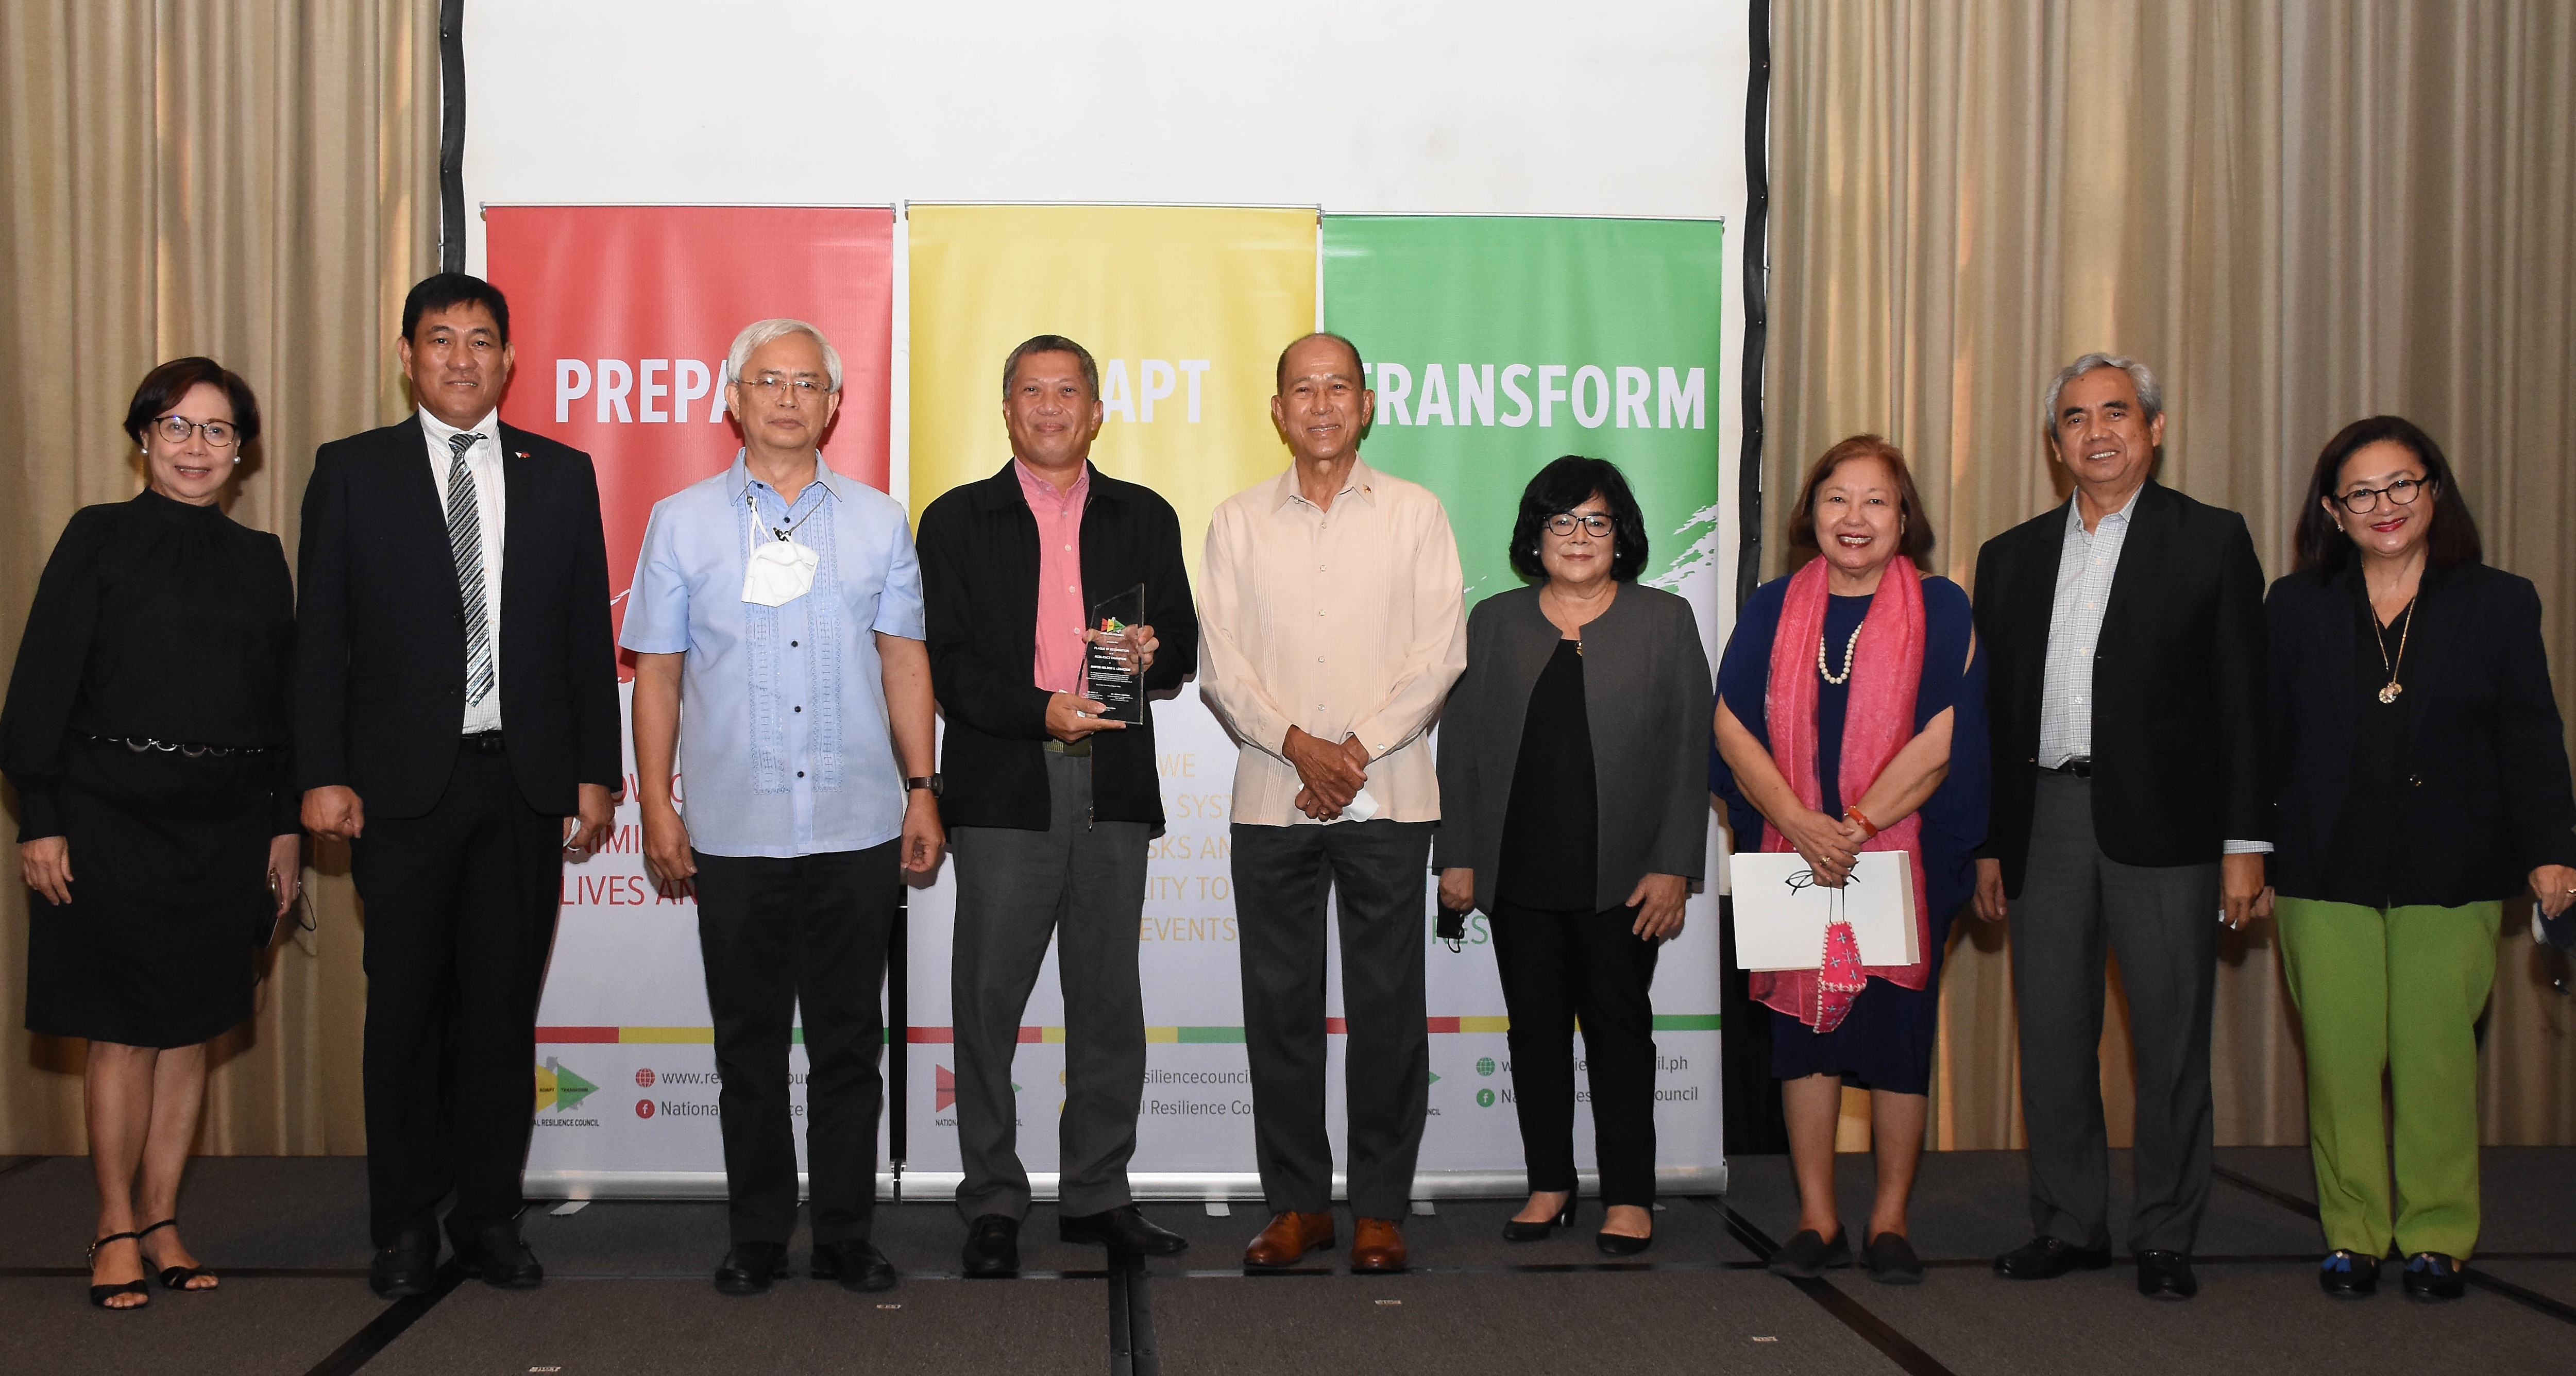 In photo from L to R, SM Supermalls VP for Corporate Compliance Group Liza Silerio, Former DILG Undersecretary for Public Safety Nestor Quinsay Jr., EVP for Zuellig Family Foundation Austere Panadero, Naga City Public Safety Director Rene Gumba, former NRC President and incumbent DENR Secretary Antonia Yulo-Loyzaga, NRC Experts Pool and Project Leader for Coastal Cities at Risk in the Philippines Dr. Emma Porio, SM Prime Holdings Consultant for Disaster Resilience VAdm. (ret.) Alexander Pama, and SM Supermalls Vice President for Corporate Marketing Grace Magno. Photo source: SM Prime